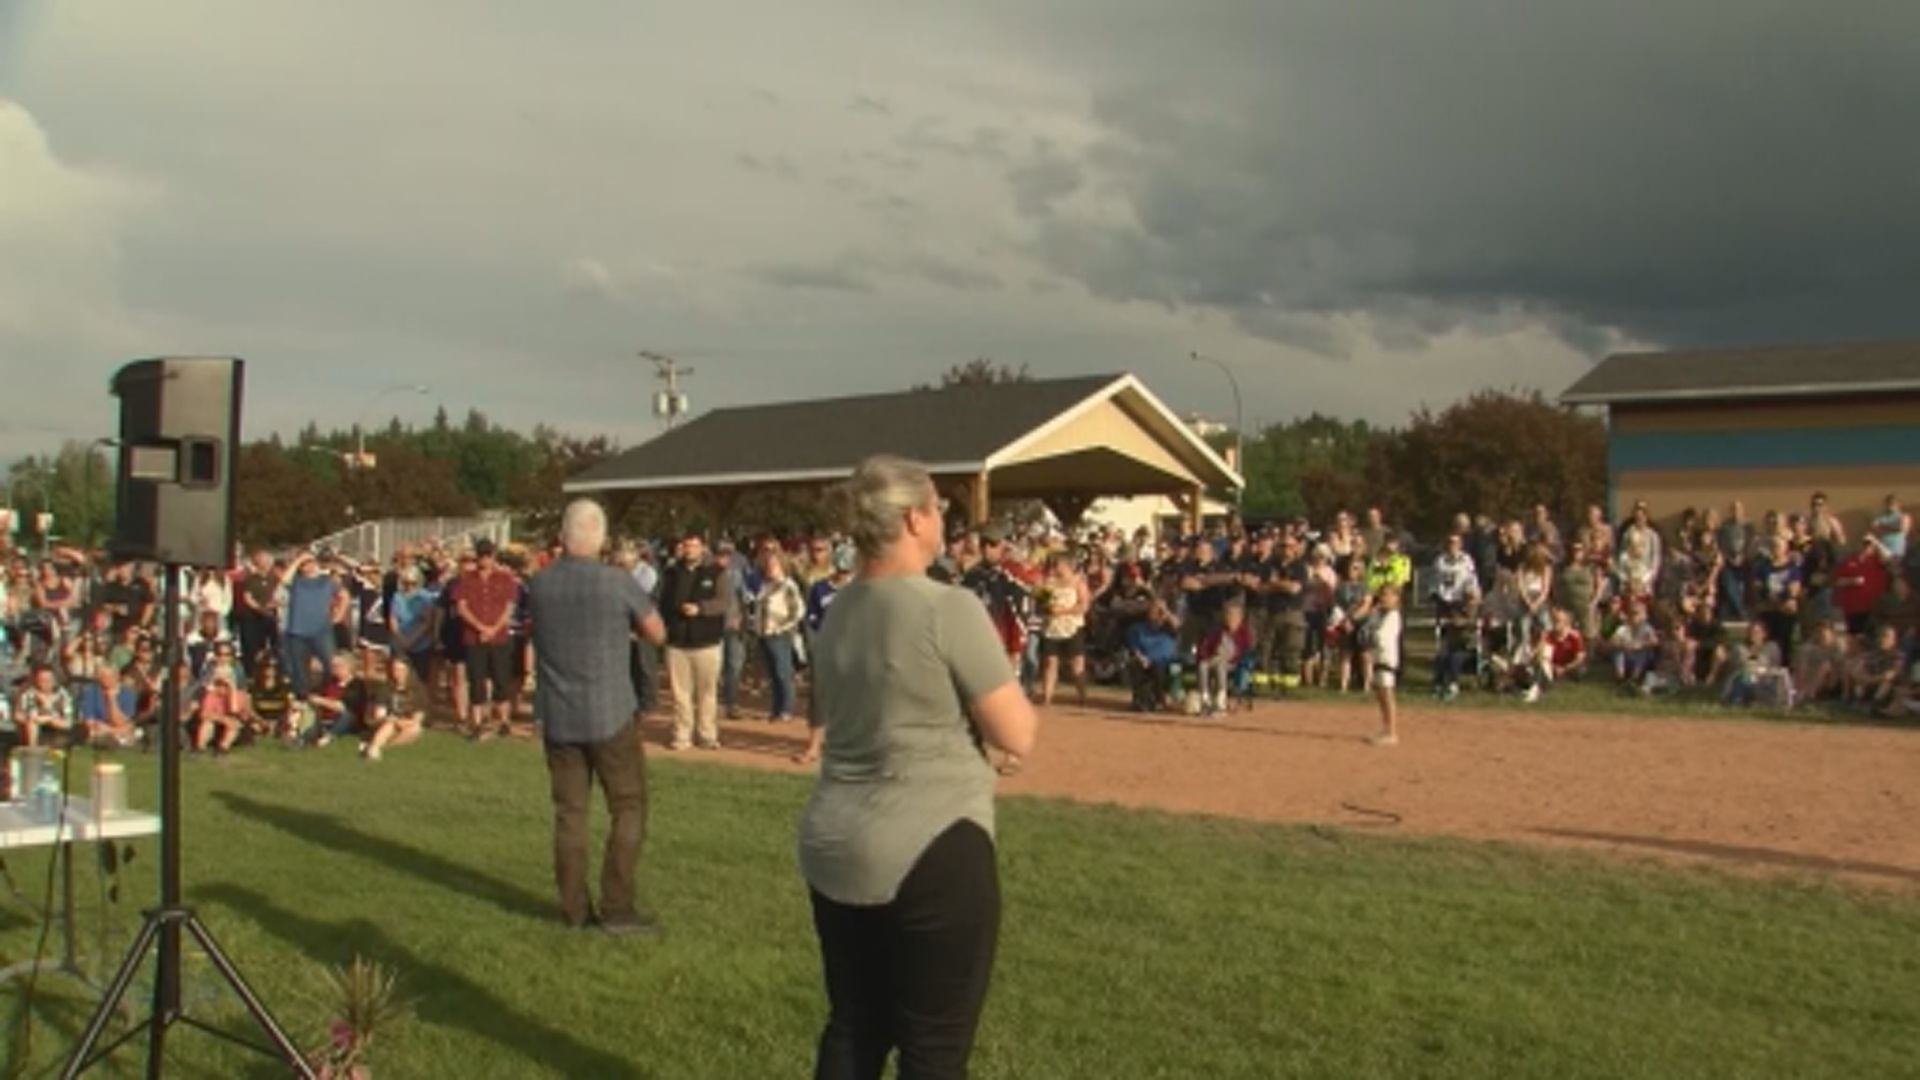 Candlelight vigil for Madison Scott in Vanderhoof, B.C. attended by 2,000 people